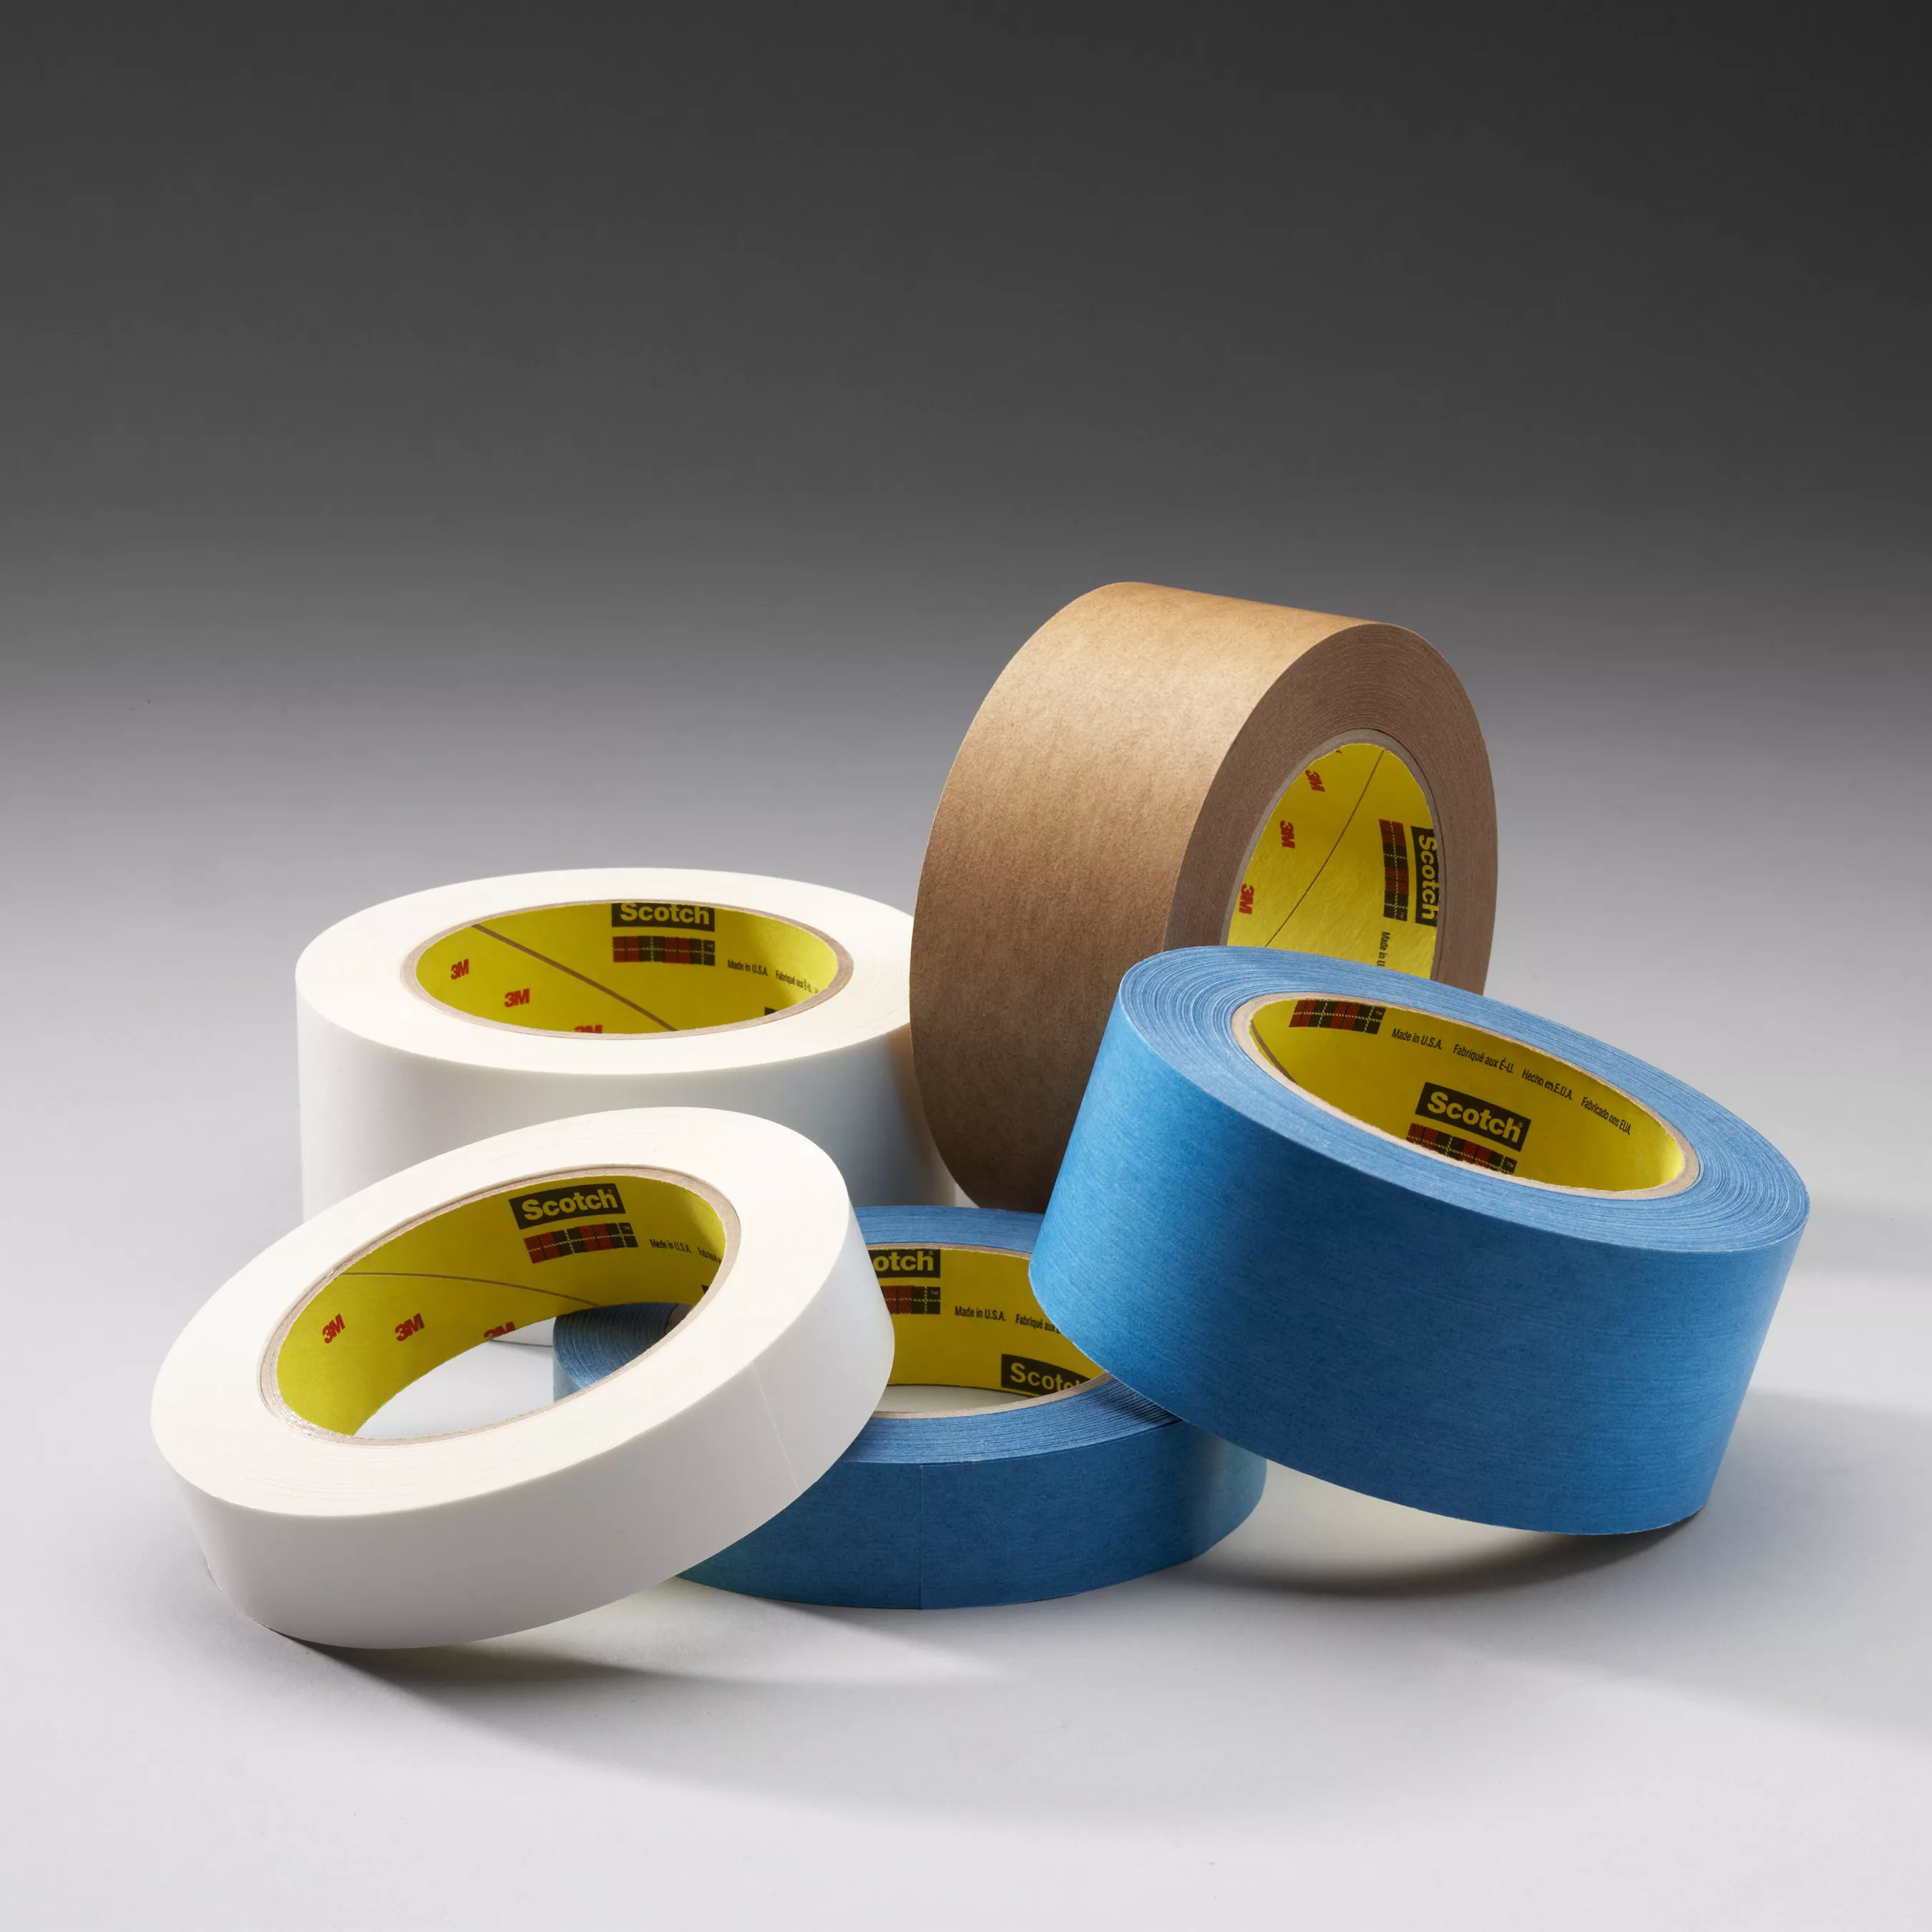 SKU 7010335748 | 3M™ Repulpable Heavy Duty Double Coated Tape R3257